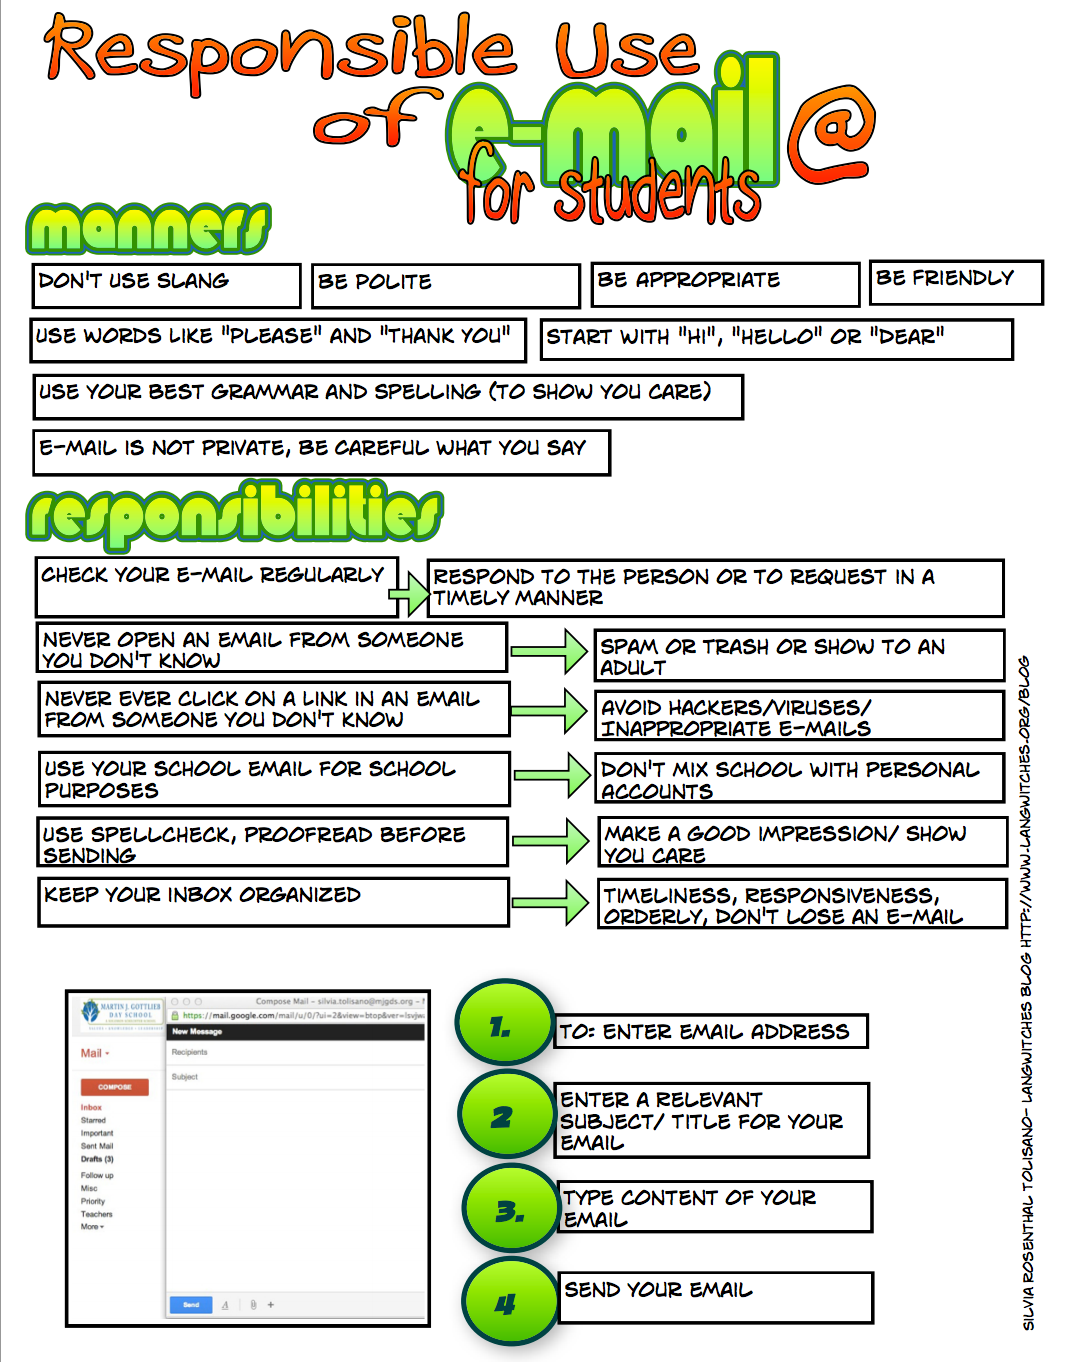 A Wonderful Visual on The Responsible Use of e-mail for Students